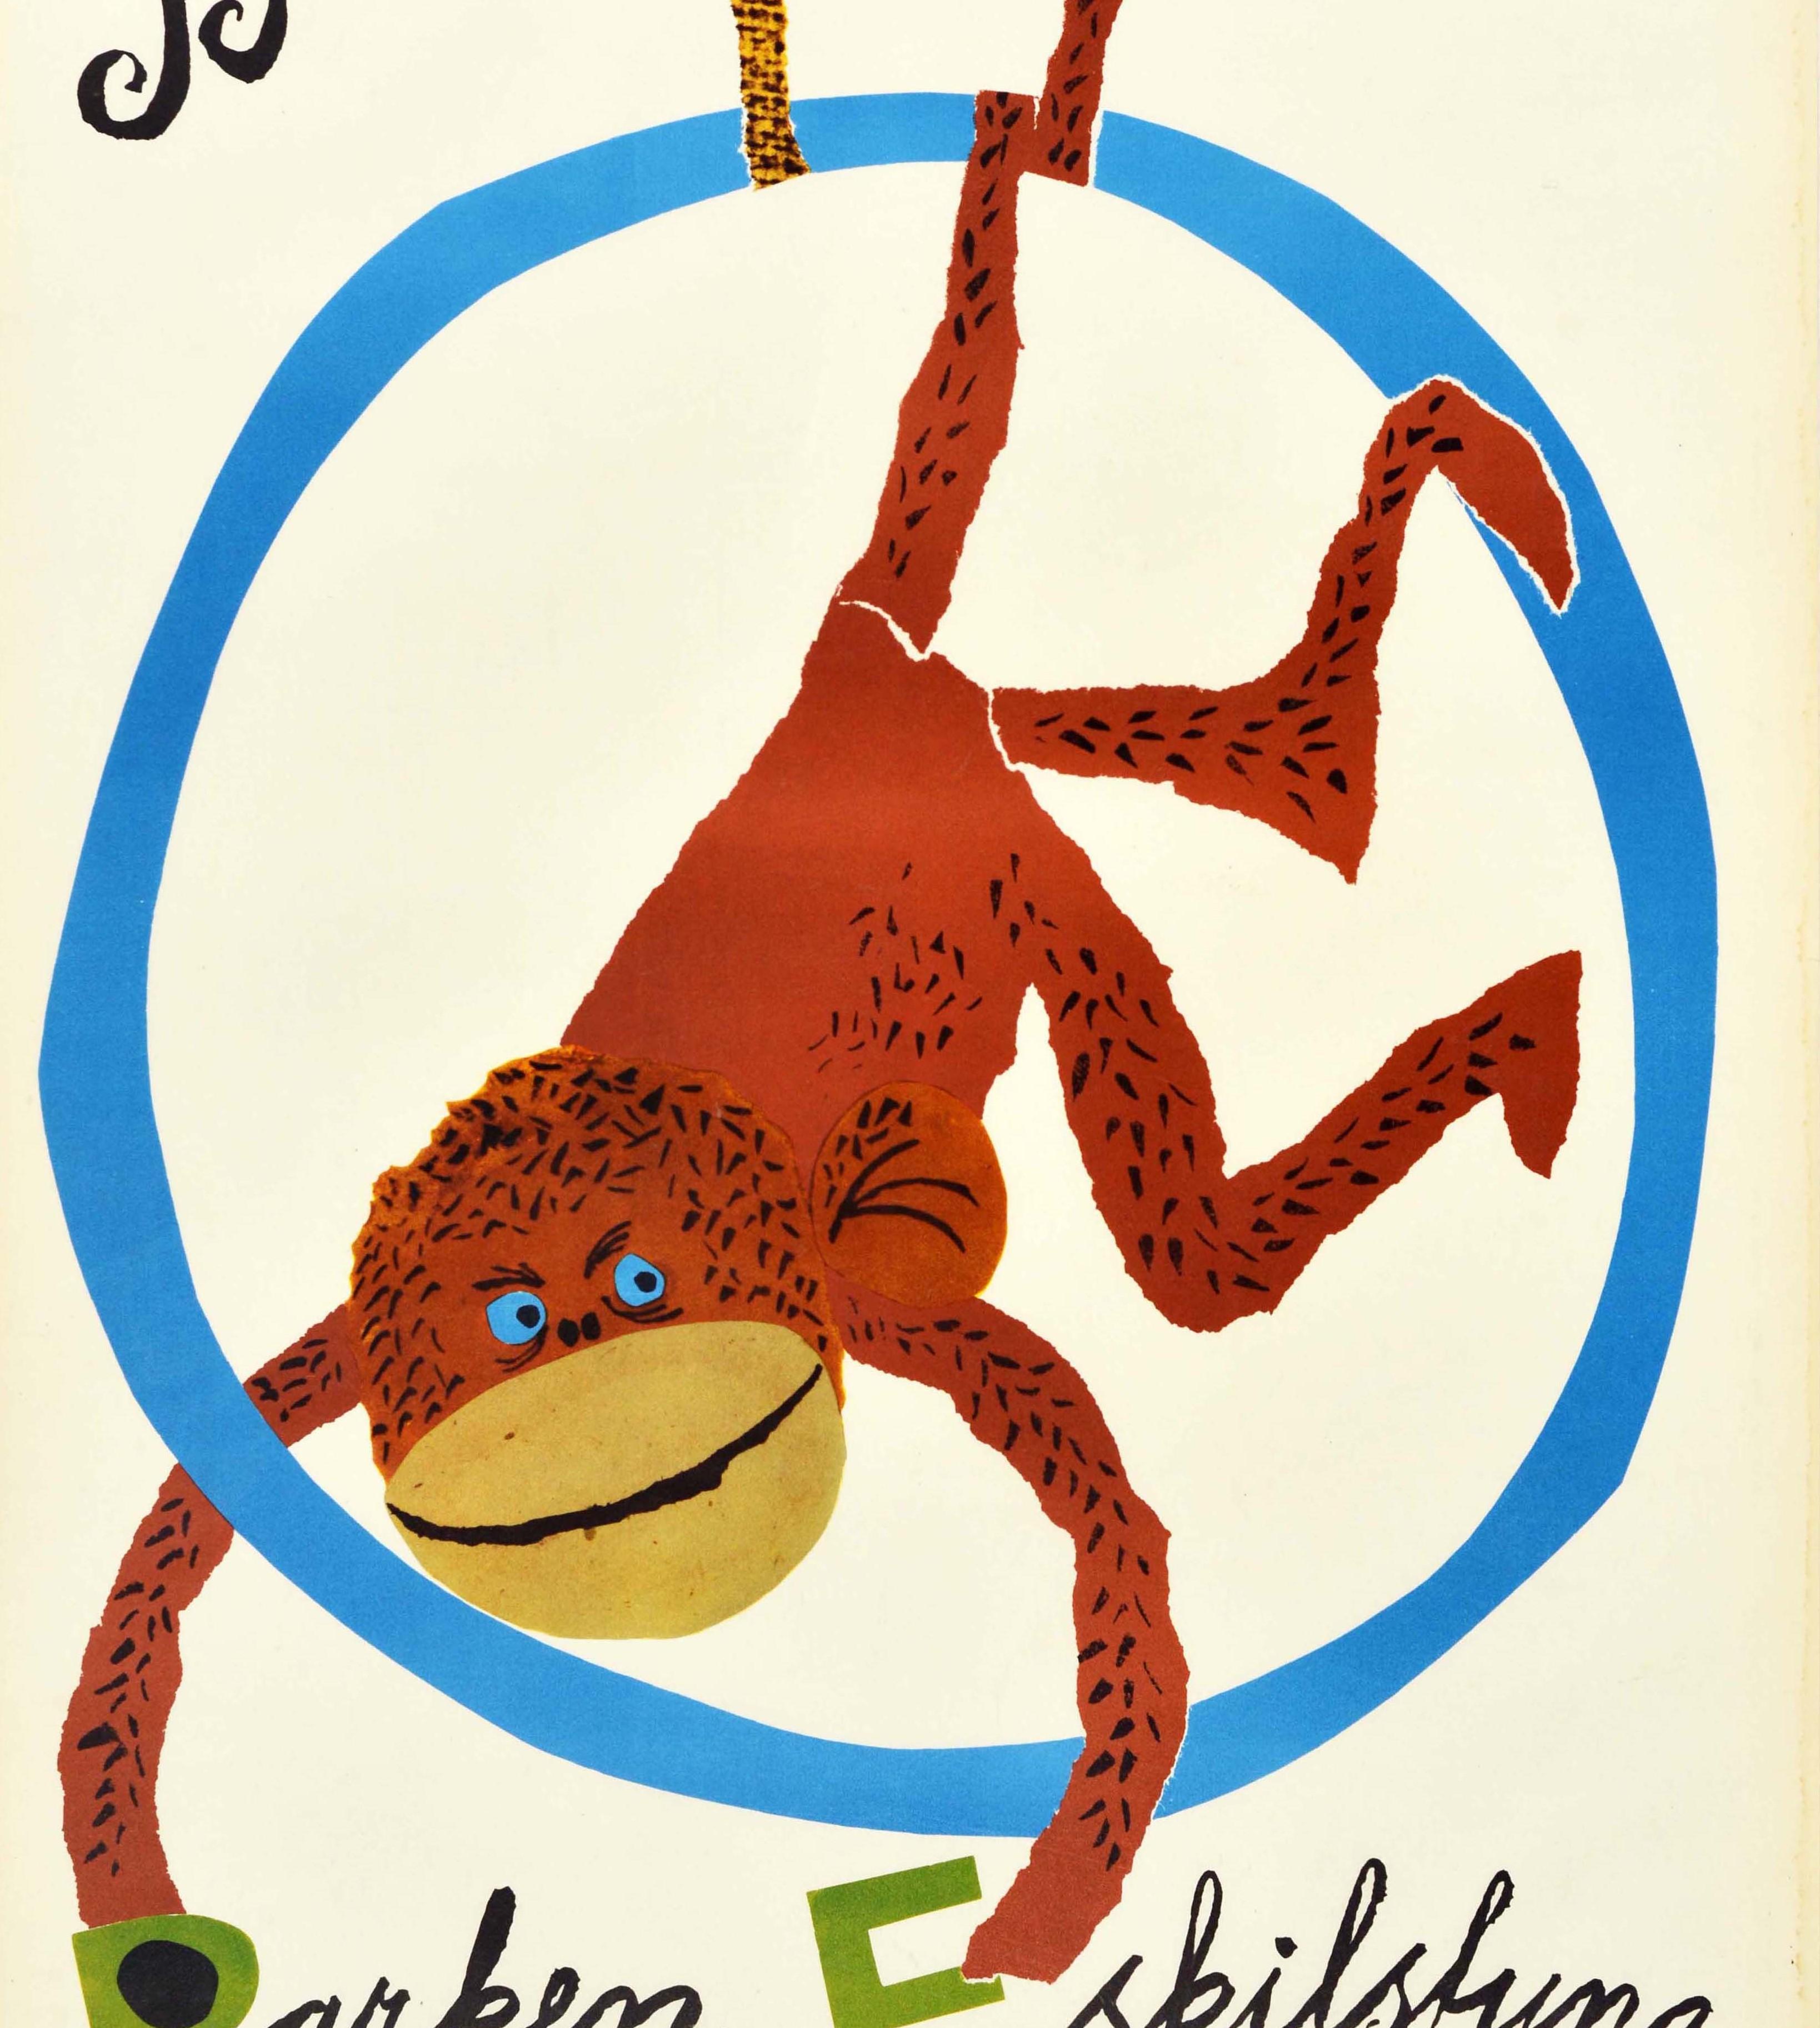 Original vintage travel poster promoting the Children's Zoo at Parken Eskilstuna in Sweden - Barnens Zoo Parken Eskilstuna Sweden - featuring a fun and colourful illustration of a mischievous monkey hanging upside down from a blue ring with its tail